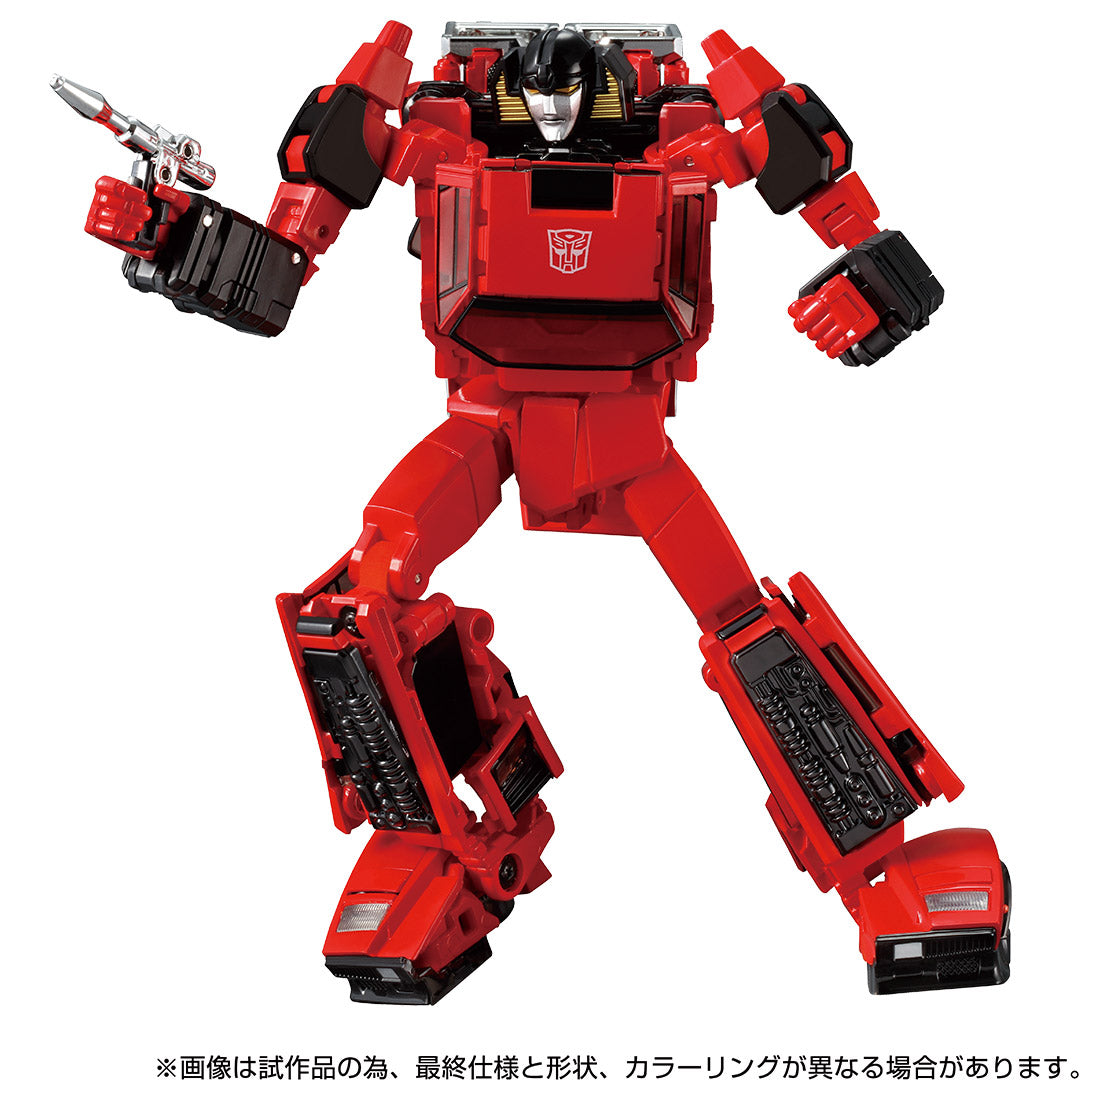 TakaraTomy - Transformers Masterpiece - MP-39+ - Spinout - Marvelous Toys